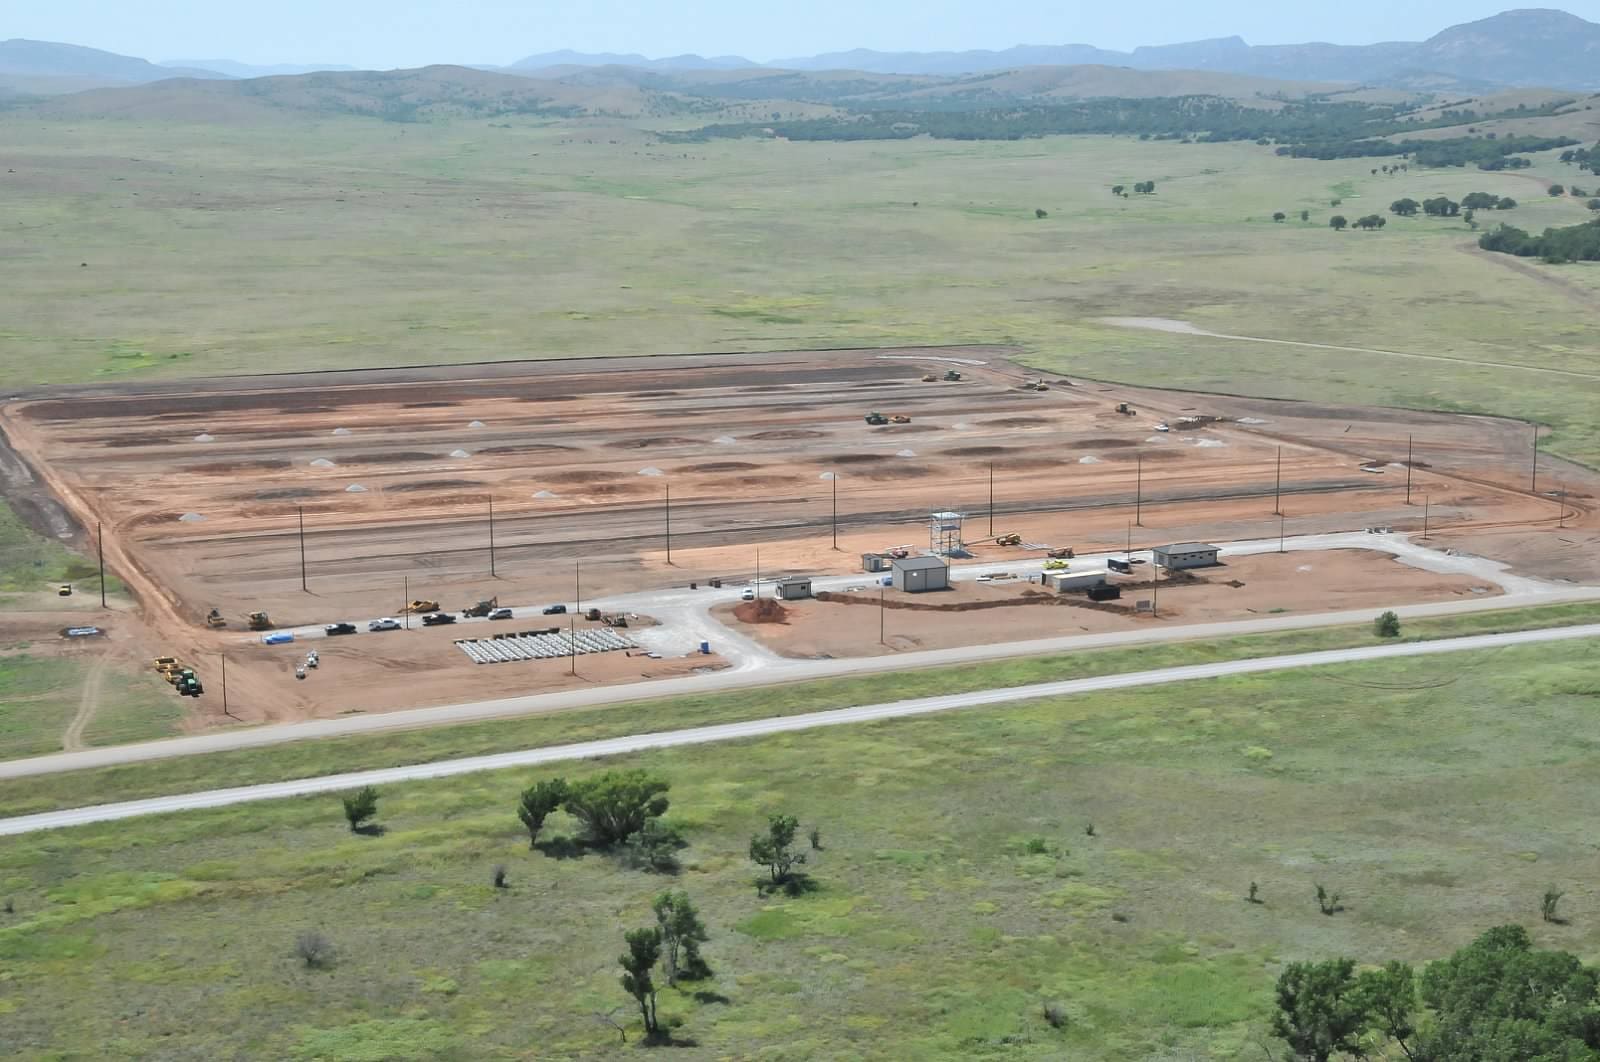 An aerial view of a large industrial site under construction with equipment and vehicles scattered across the area.